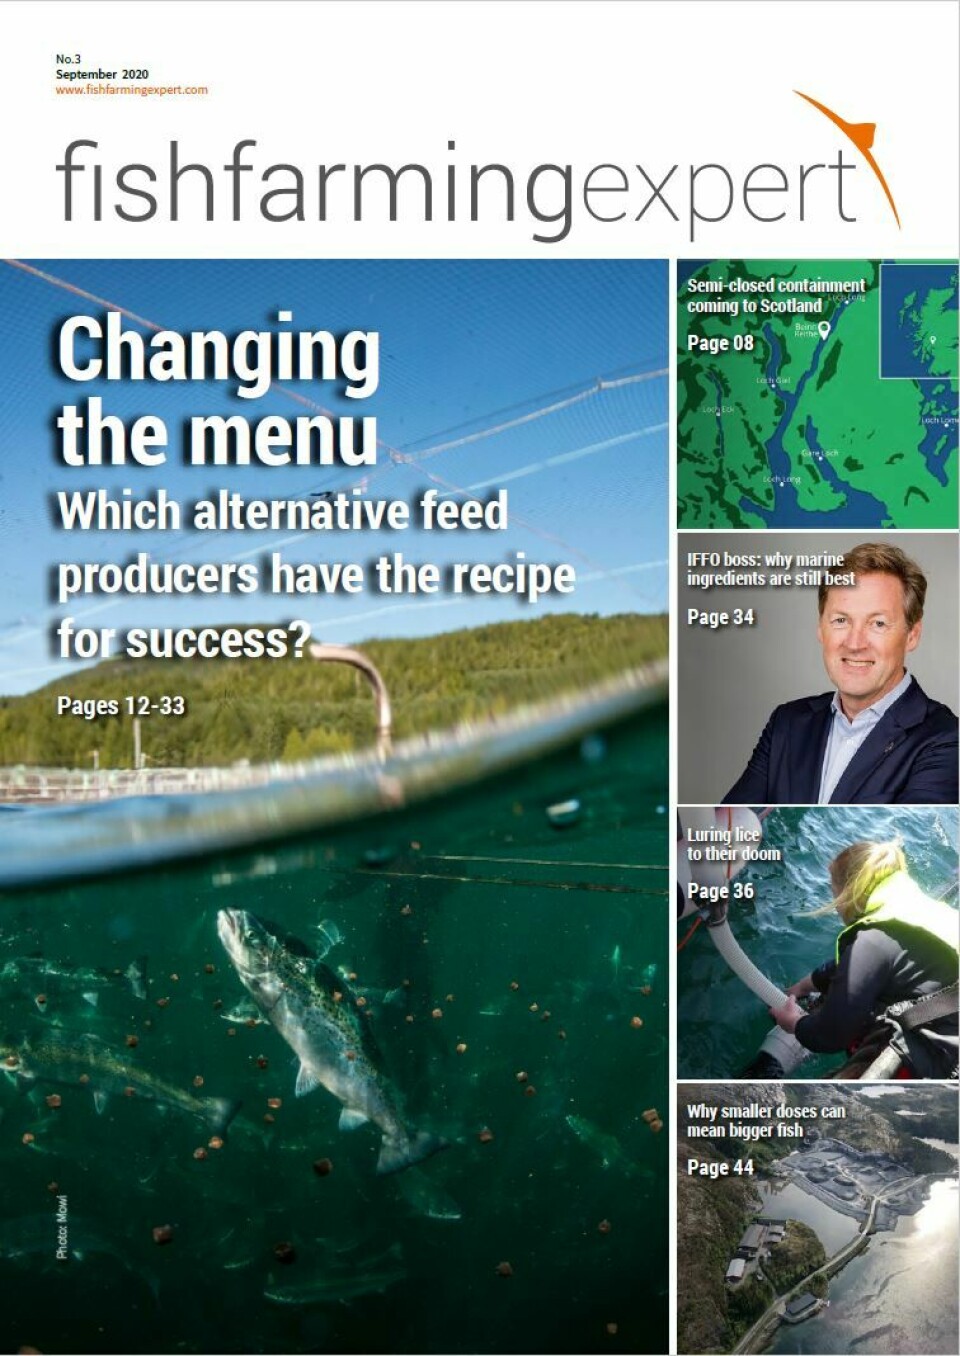 Read more about GM canola and camelina, along with other alternative feed ingredients, in the current edition of Fish Farming Expert magazine, available free to read online.